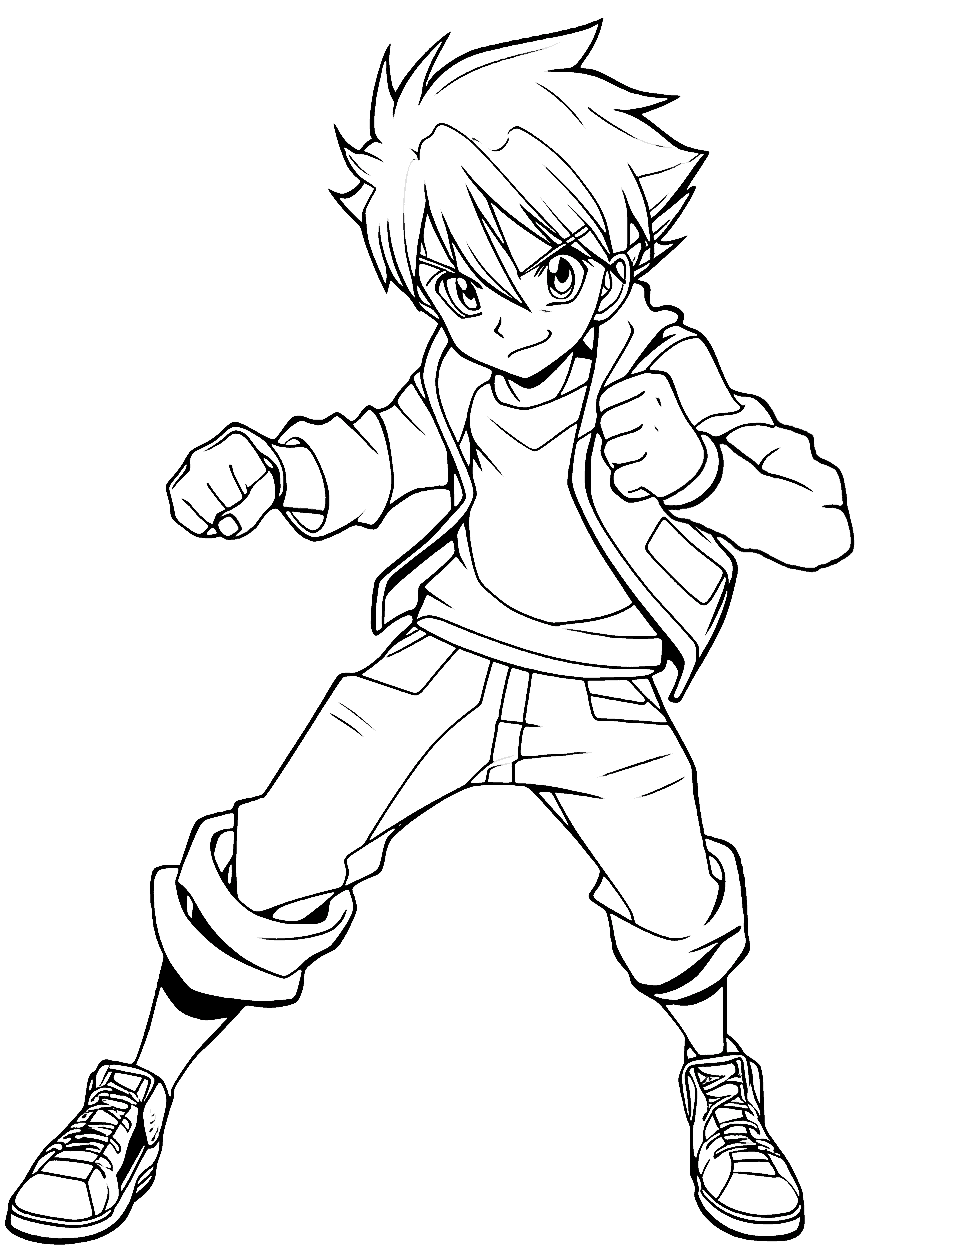 Anime Coloring Pages - Coloring Pages-demhanvico.com.vn